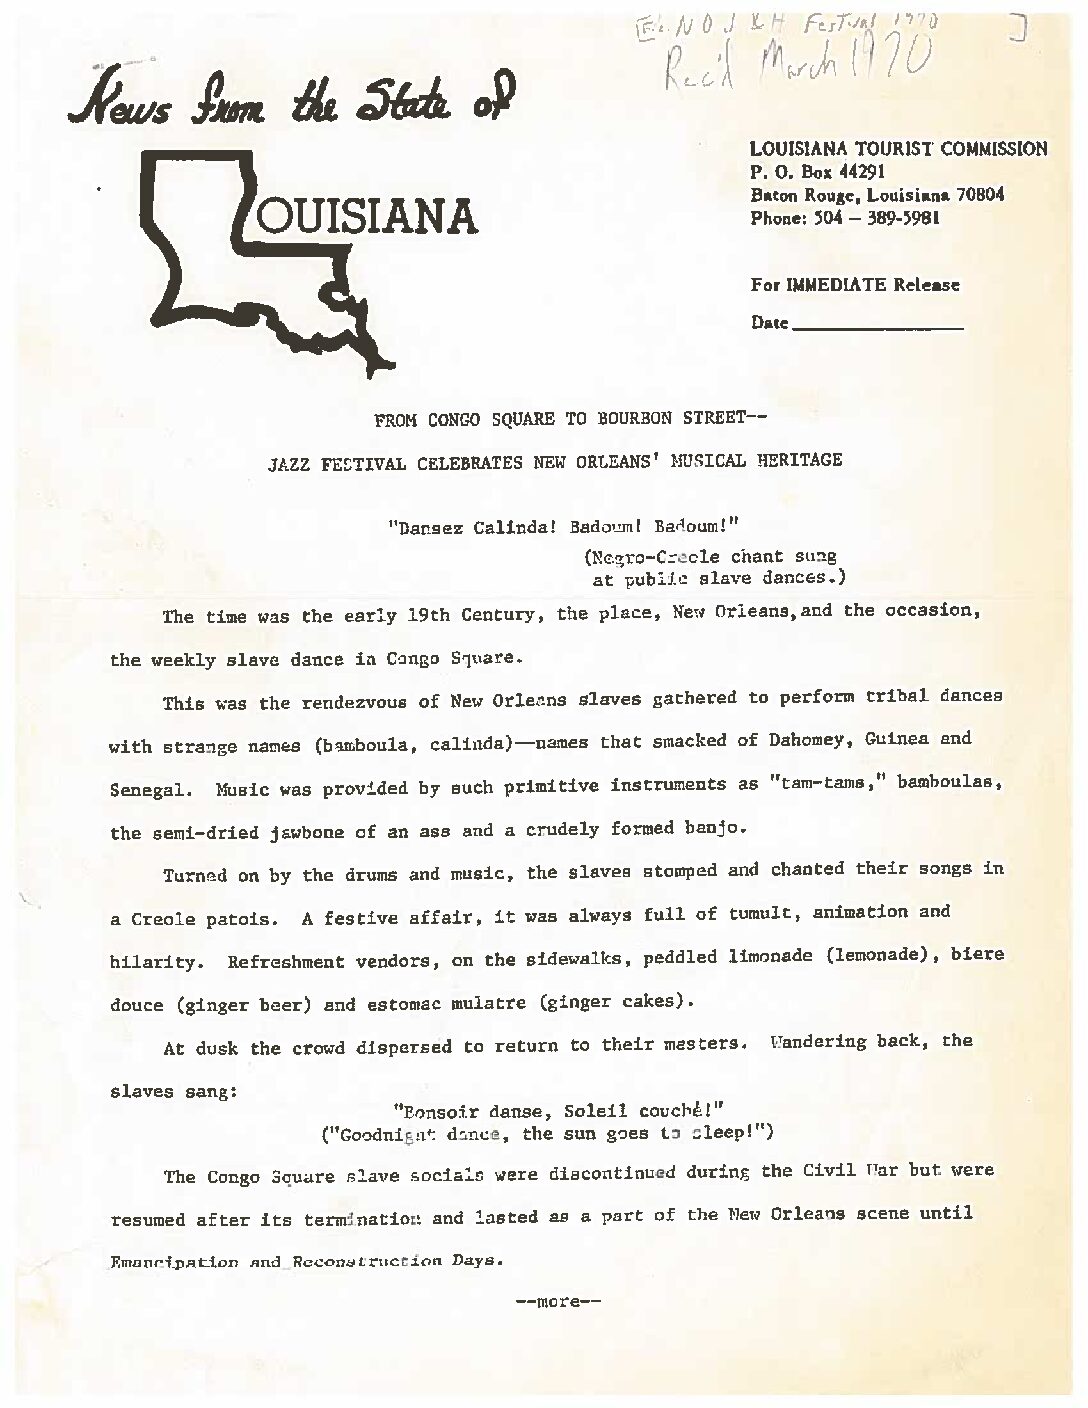 Page 1 of the Louisiana Tourist Commission press release about the inaugural New Orleans Jazz & Heritage Festival, produced by George Wein, March 1970, Hogan Archive vertical file, Tulane University Special Collections.